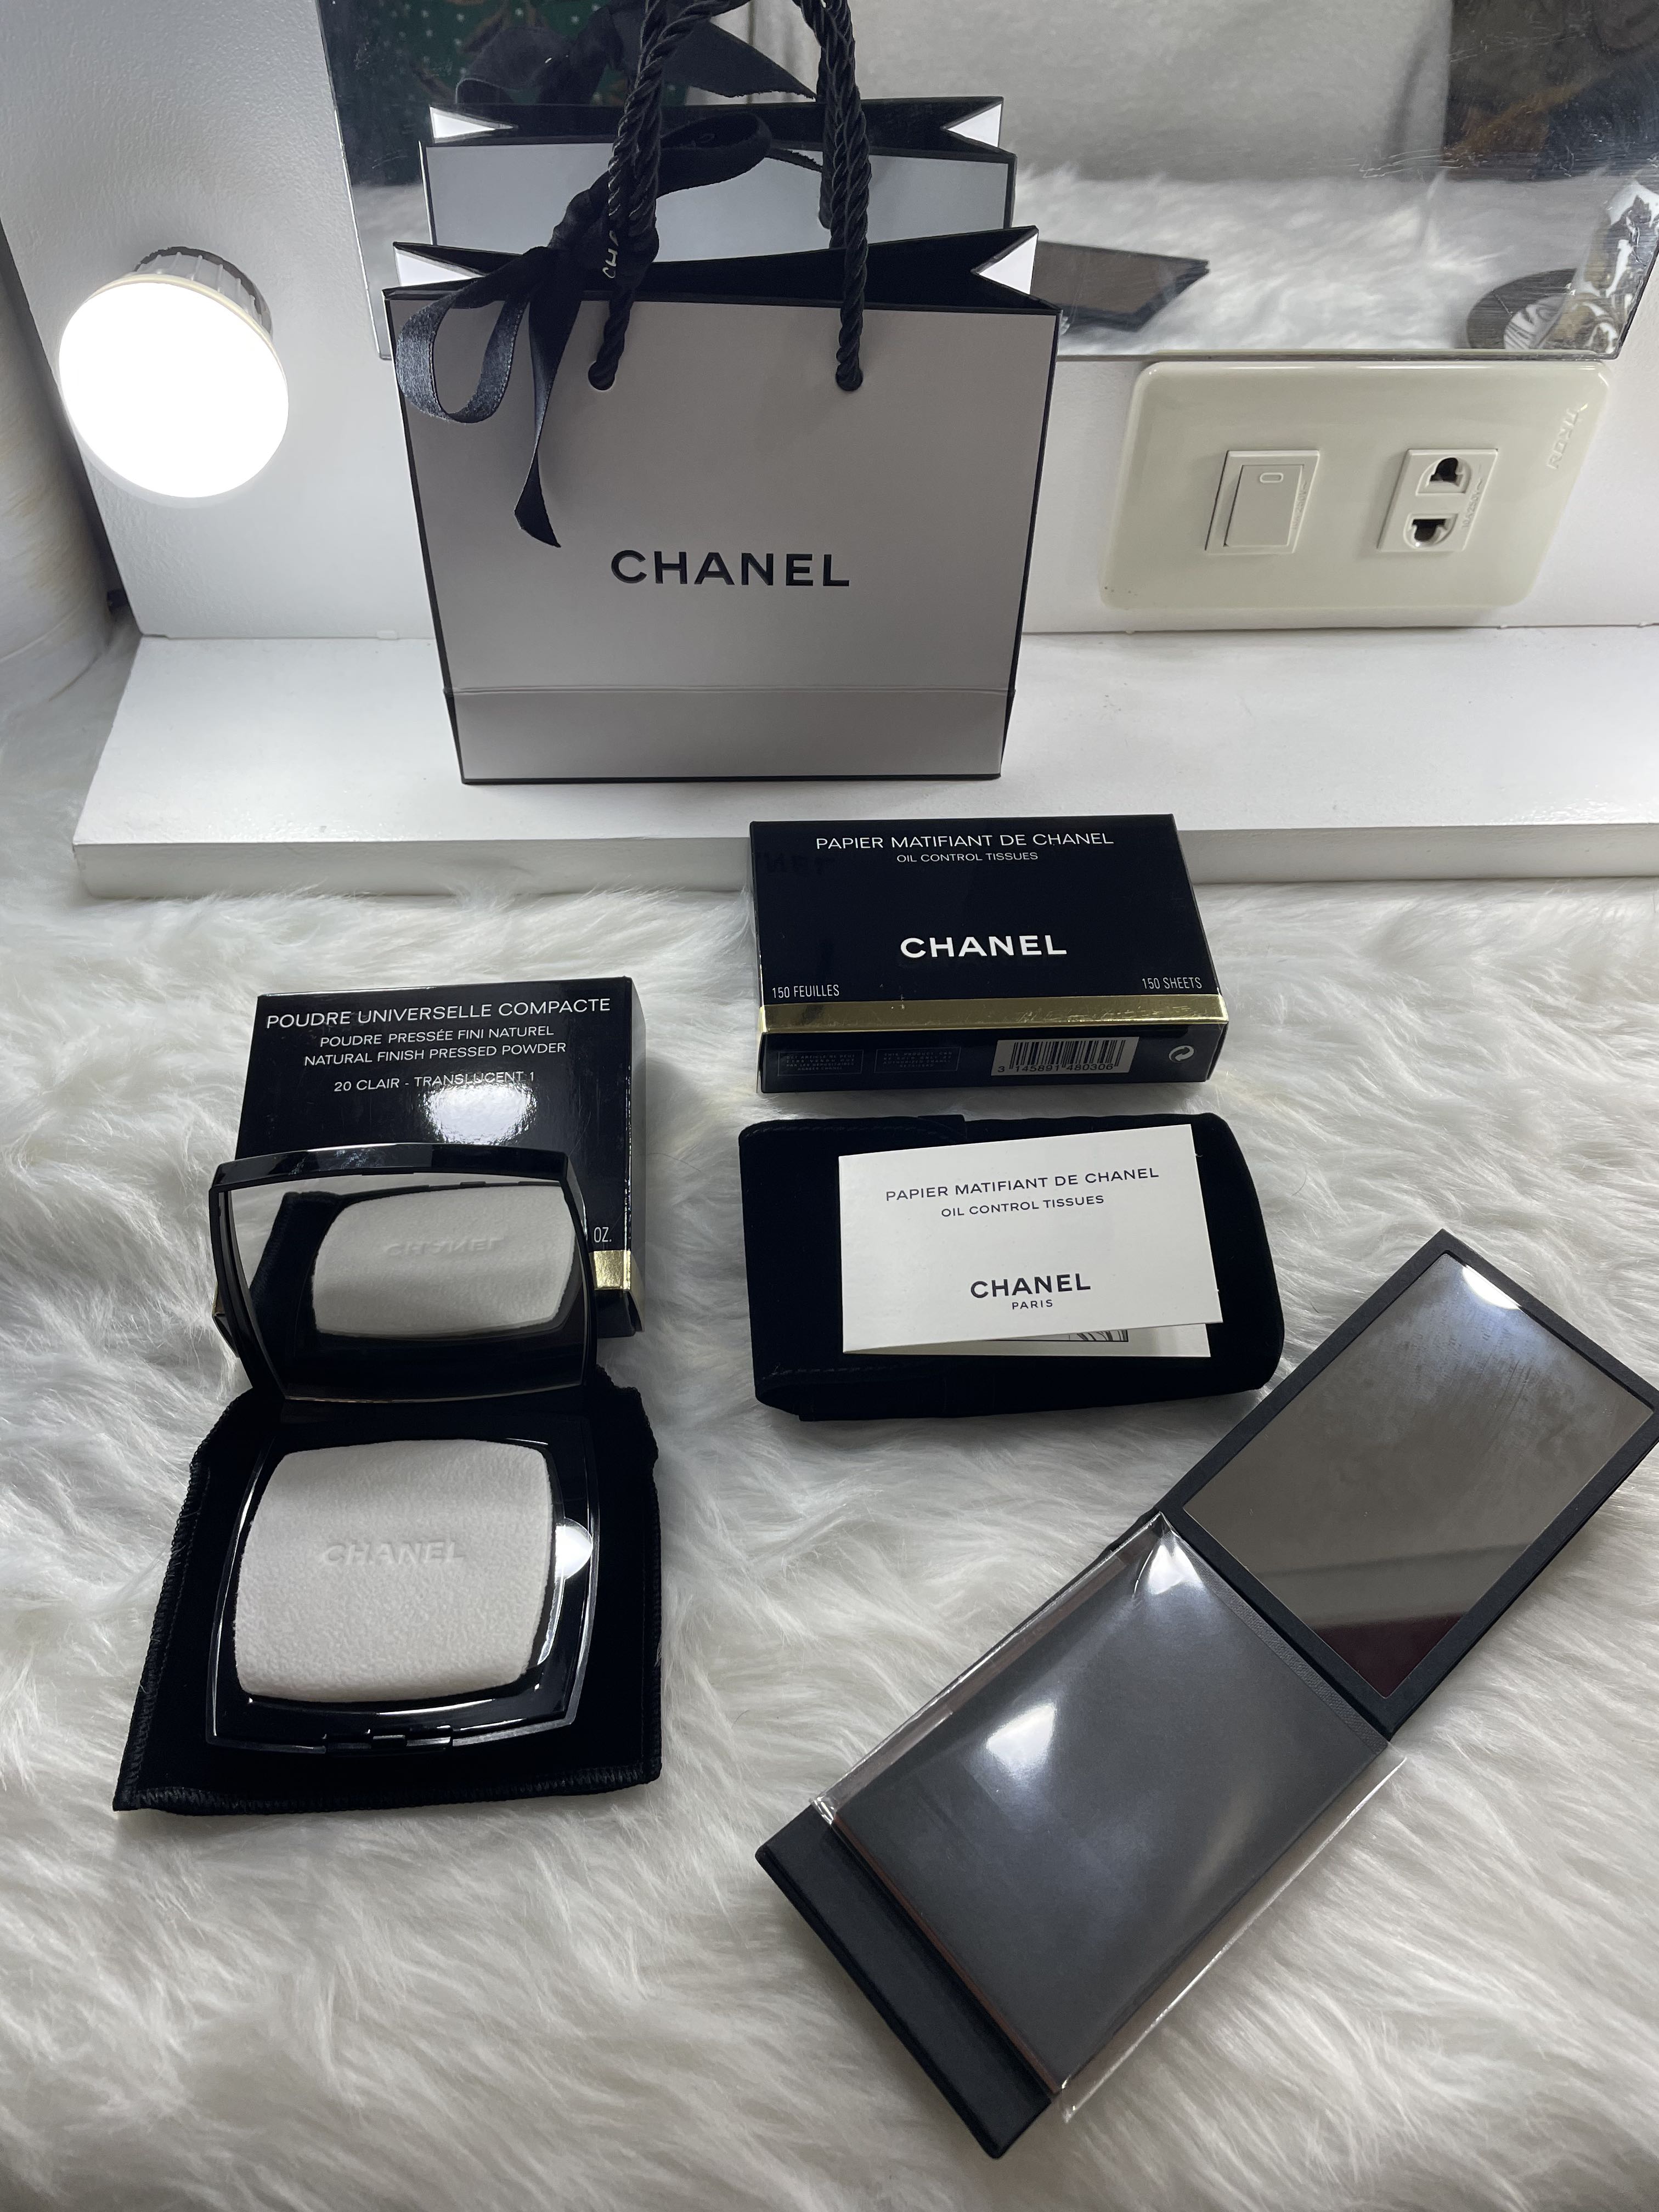 Chanel Oil Blot with mirror, Beauty & Personal Care, Face, Makeup